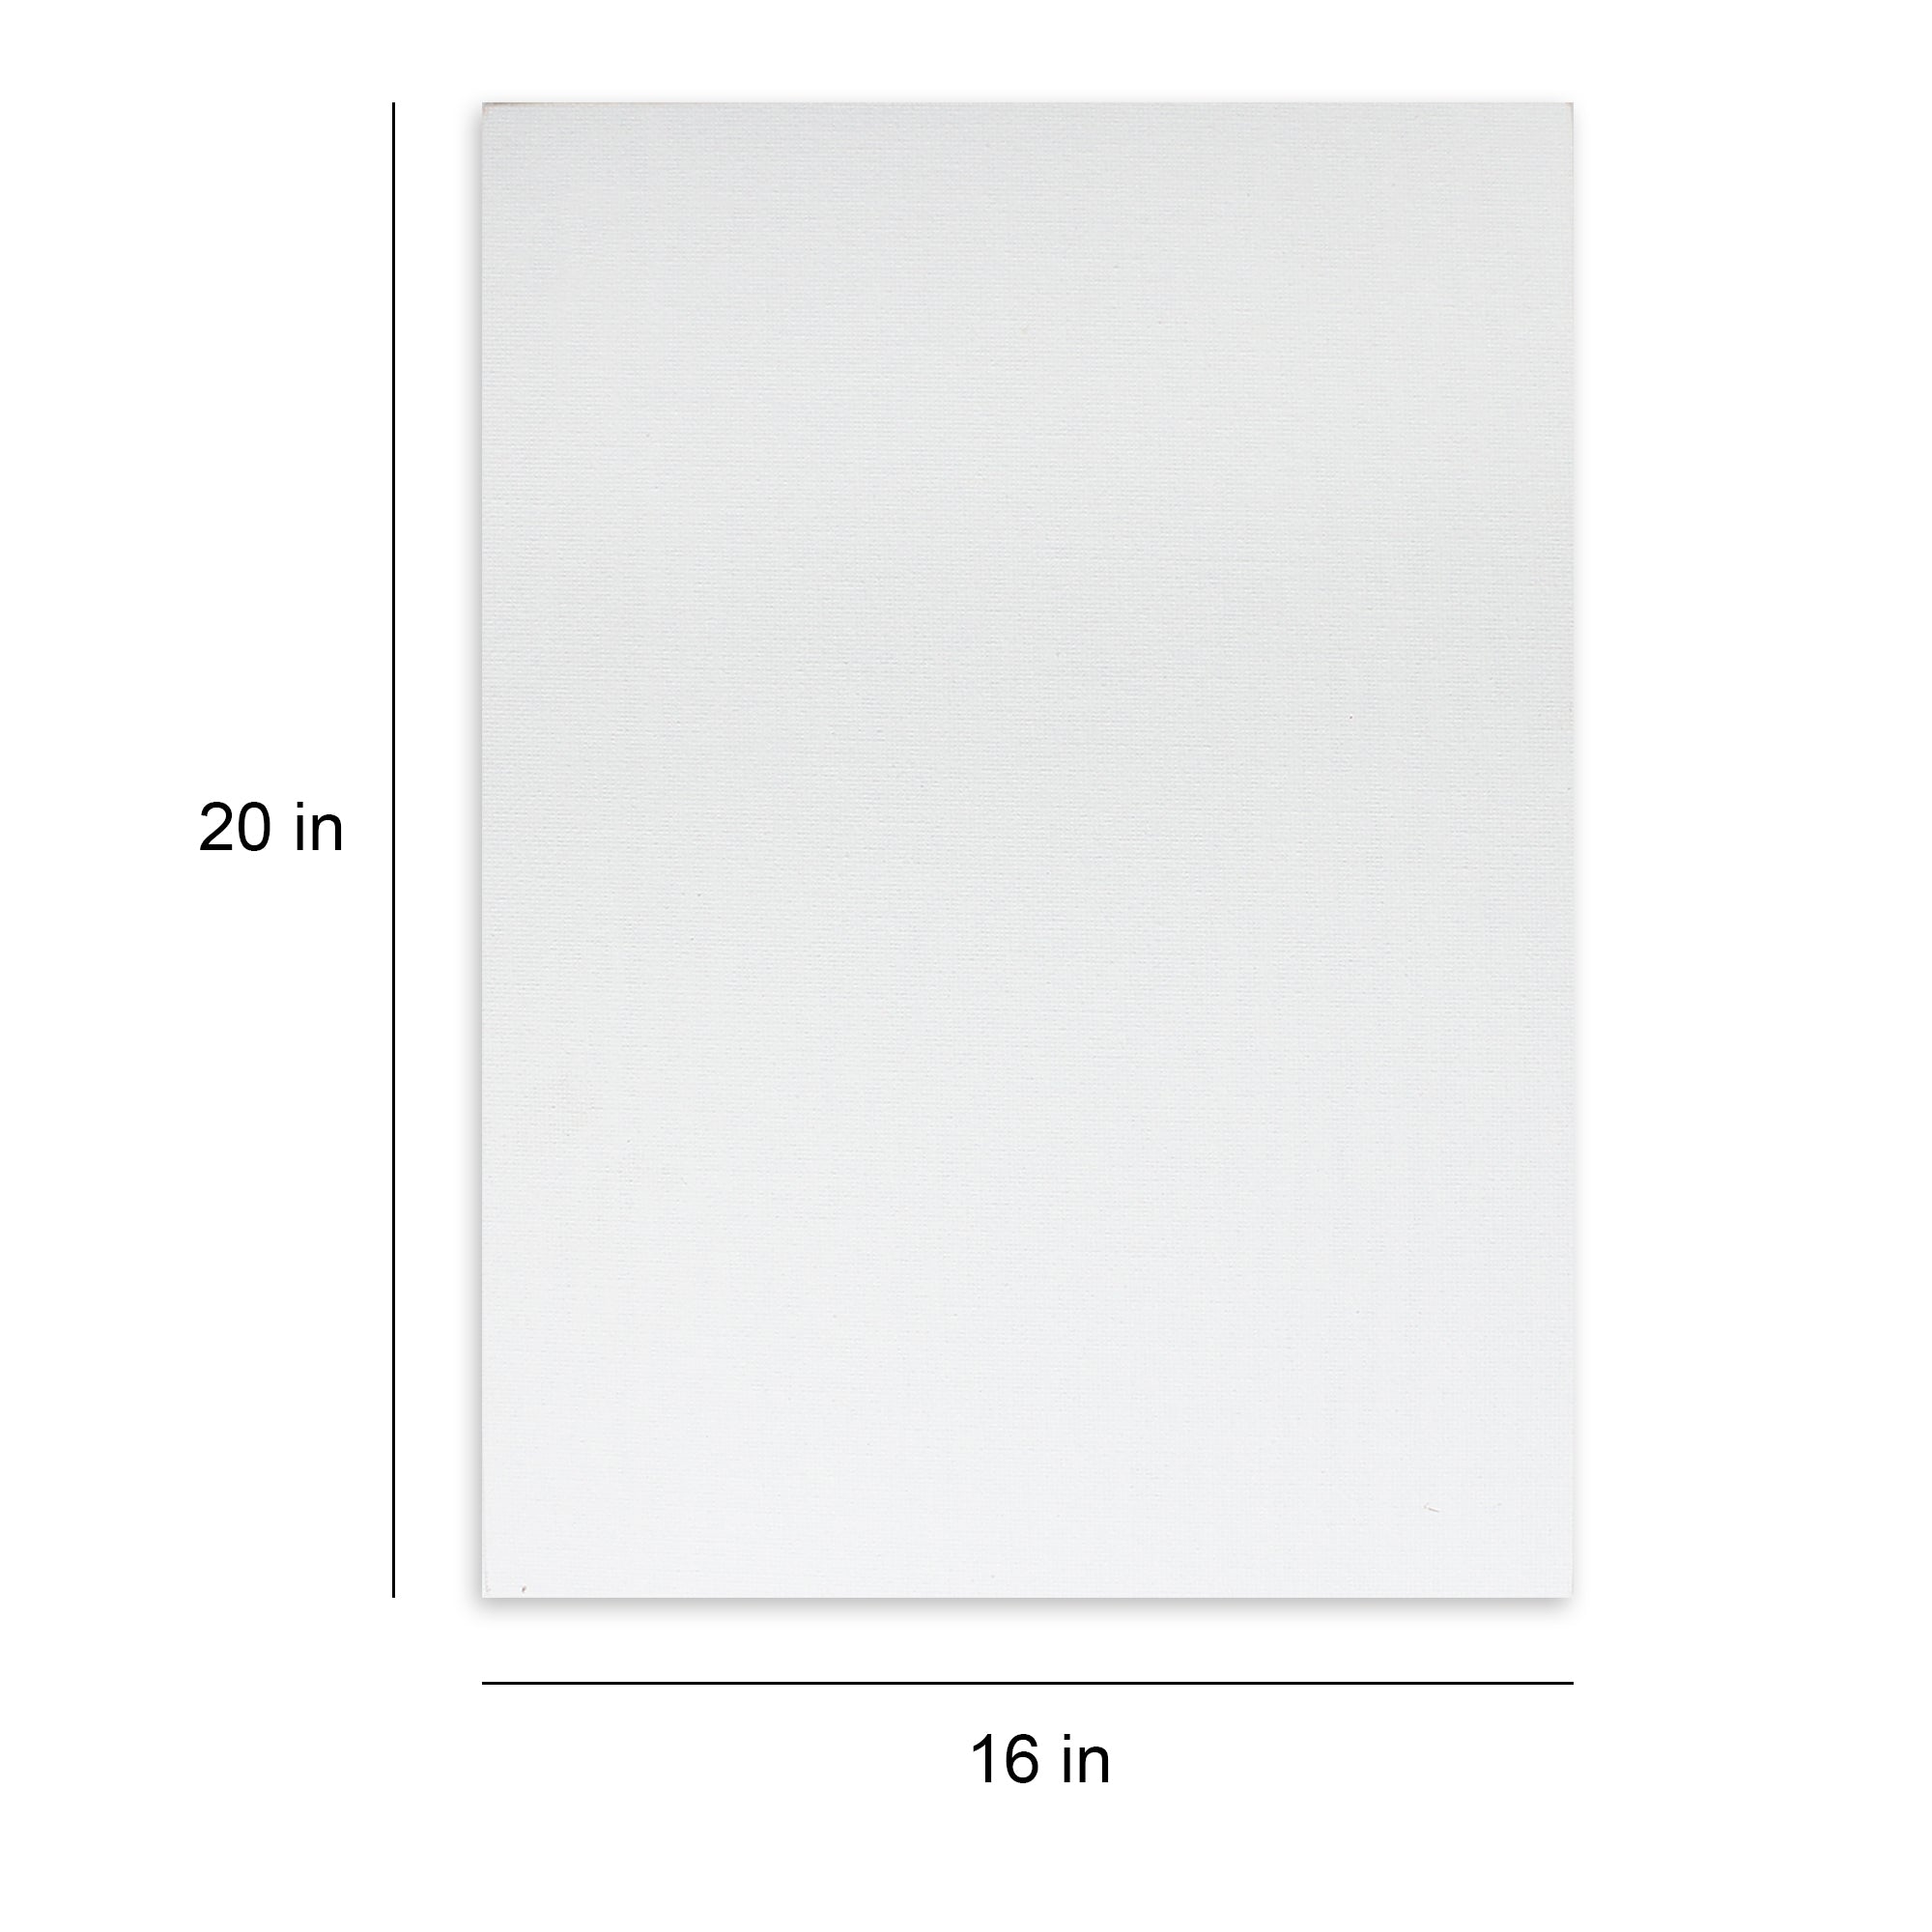 Canvas Panel 3Mm Mdf Board 16 X 20Inch 1Pc (Pack of 3)